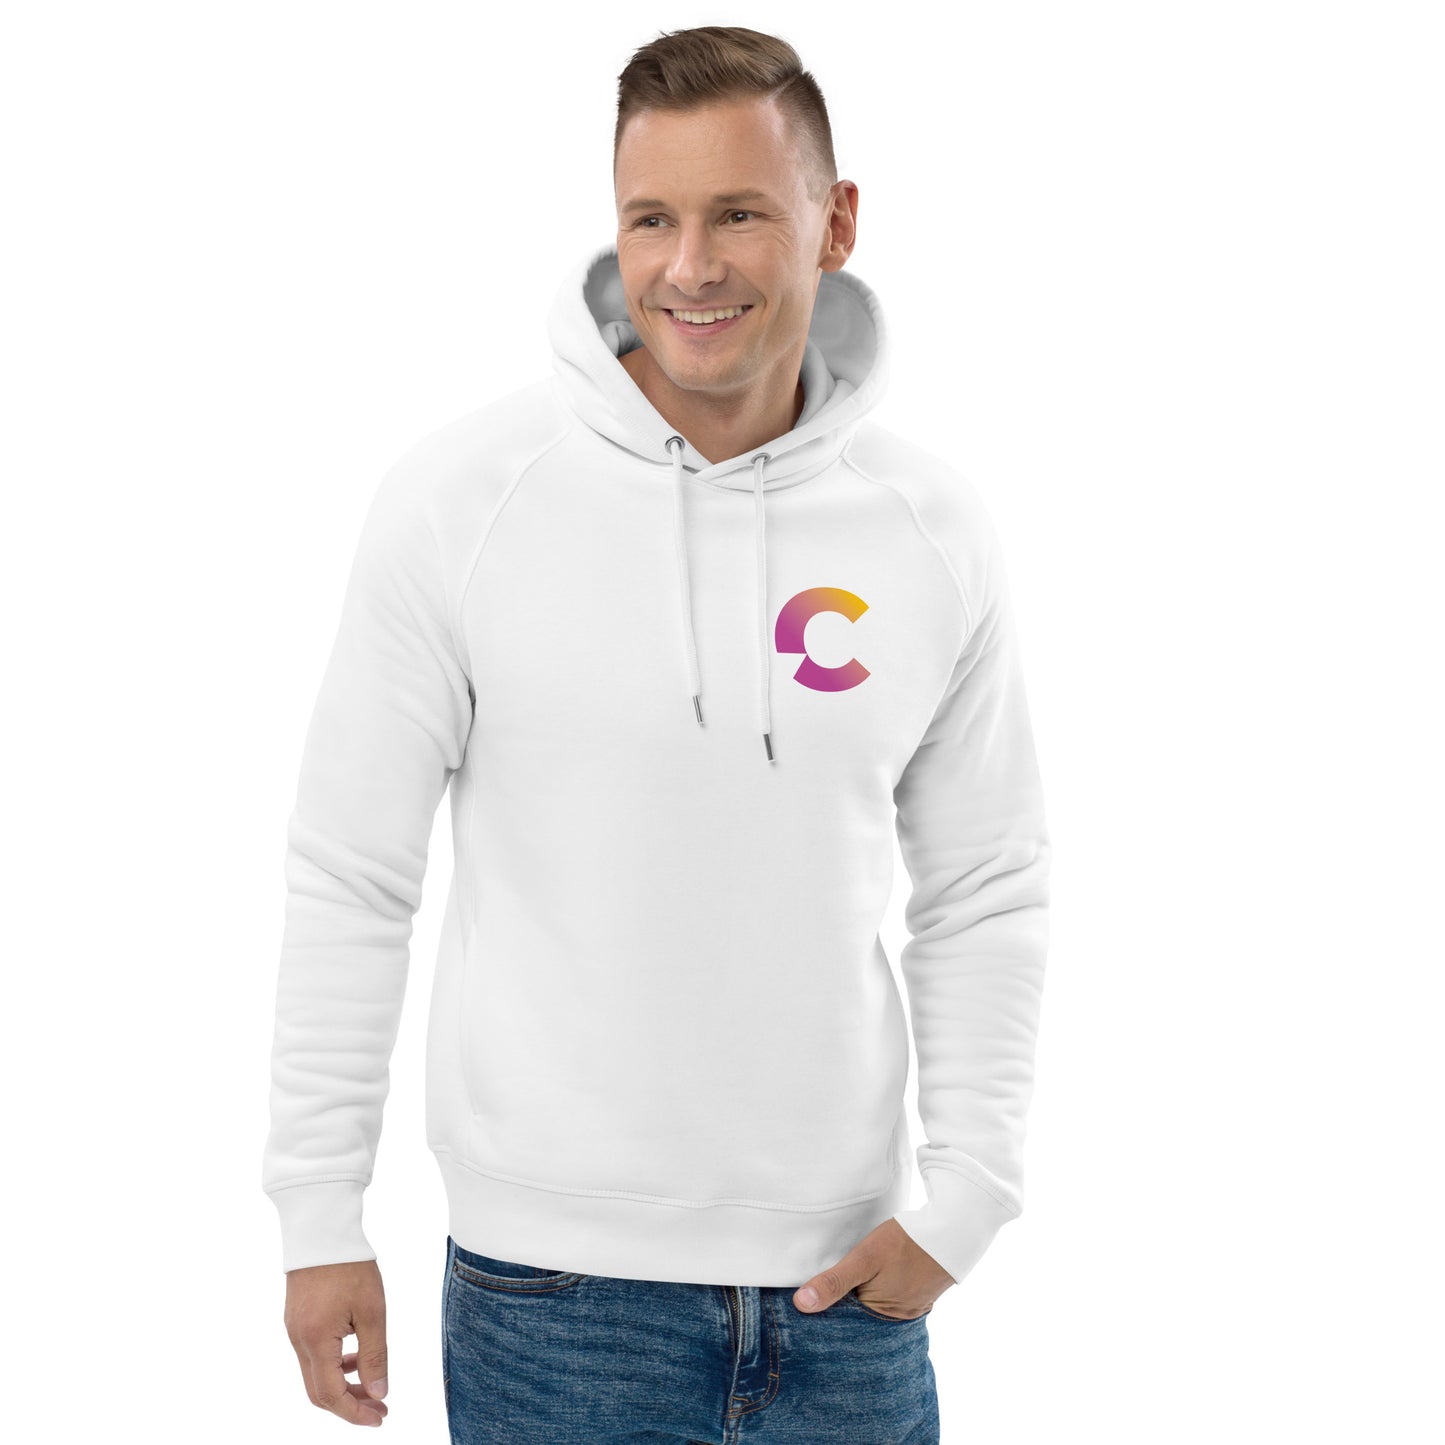 Connecting Cool Creators Hoodie (White)